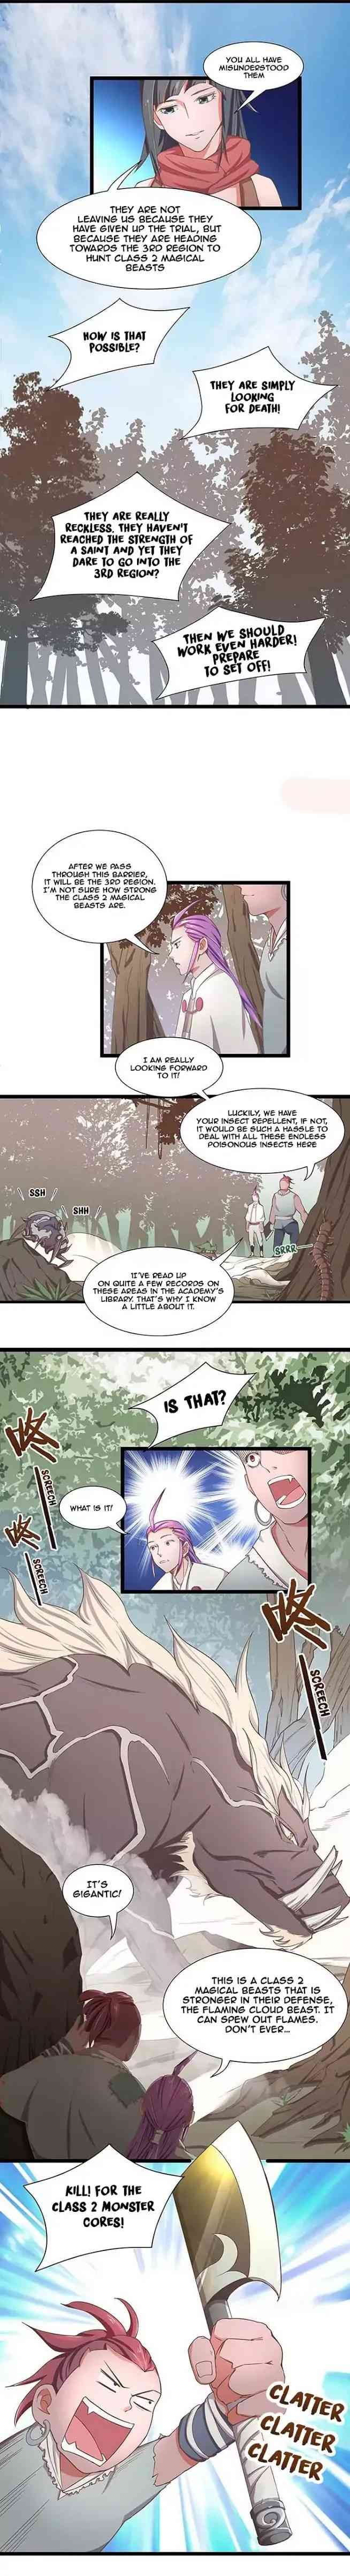 Chaotic Sword God Chapter 15 page 6